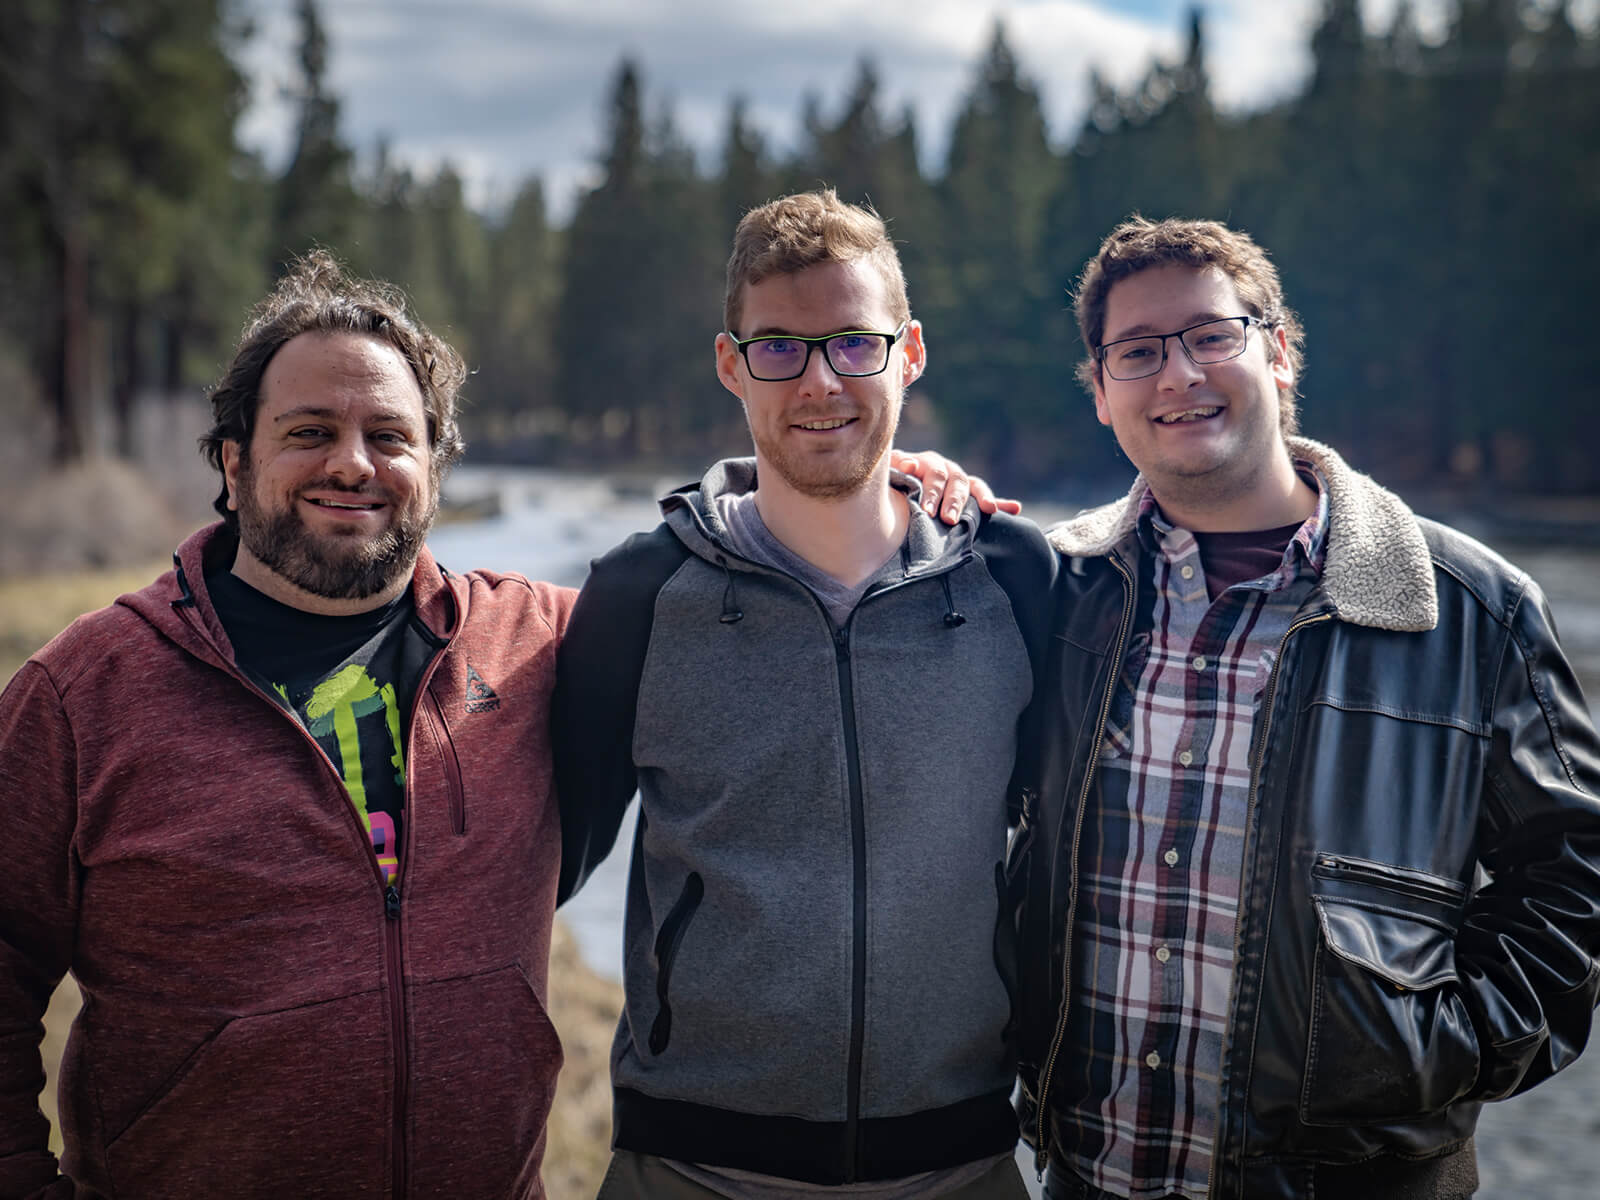 Jacob Fieth, Geoffry Hammon, and Sawyer Paradise pose on the Deschutes River near SIE Bend Studio’s offices.